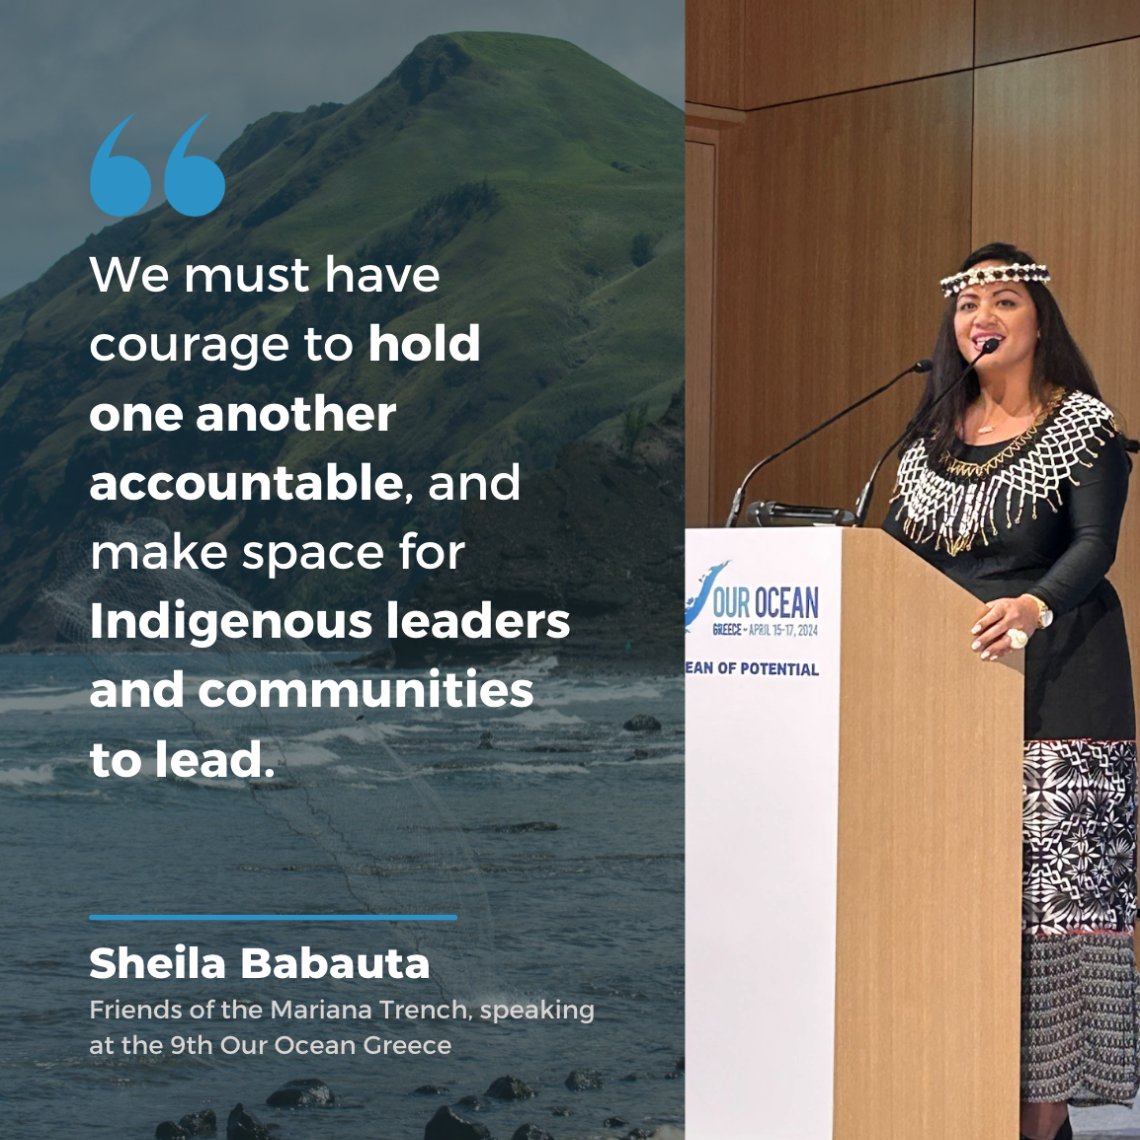 Reflecting on the powerful moments at the 9th annual Our Ocean Conference in Athens! 🌊 From discussions on equity to youth leadership, we're inspired by our partners' dedication to ocean conservation. Join us in celebrating these impactful moments!